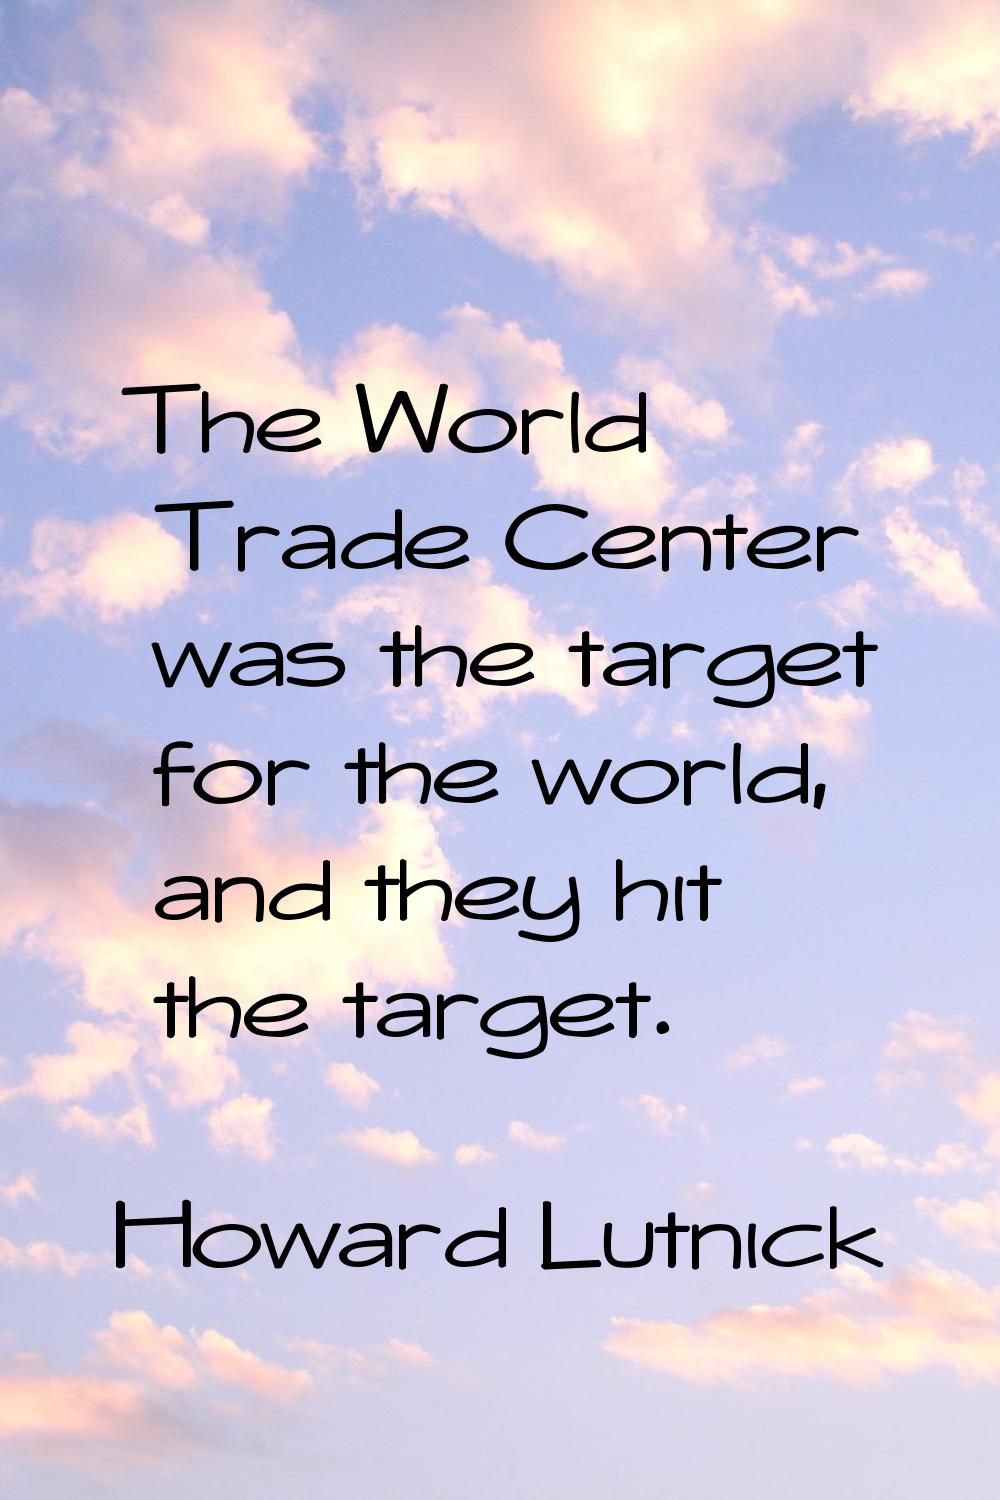 The World Trade Center was the target for the world, and they hit the target.